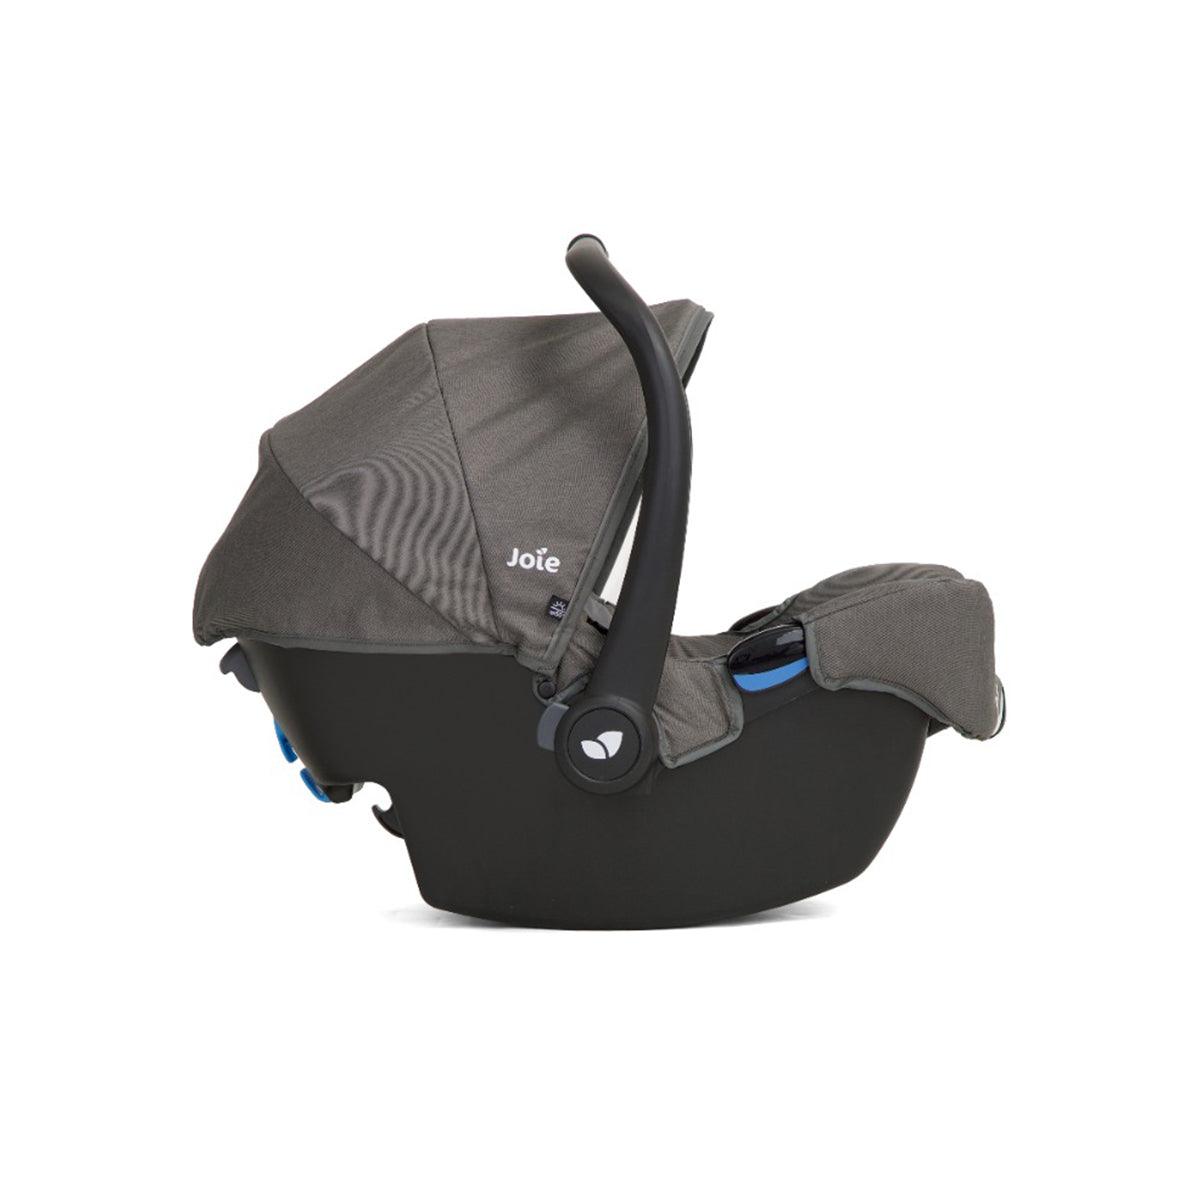 Joie Gemm Infant Carrier Lite Grey - Suitable Rearward Facing Birth for Ages 0-1 Years